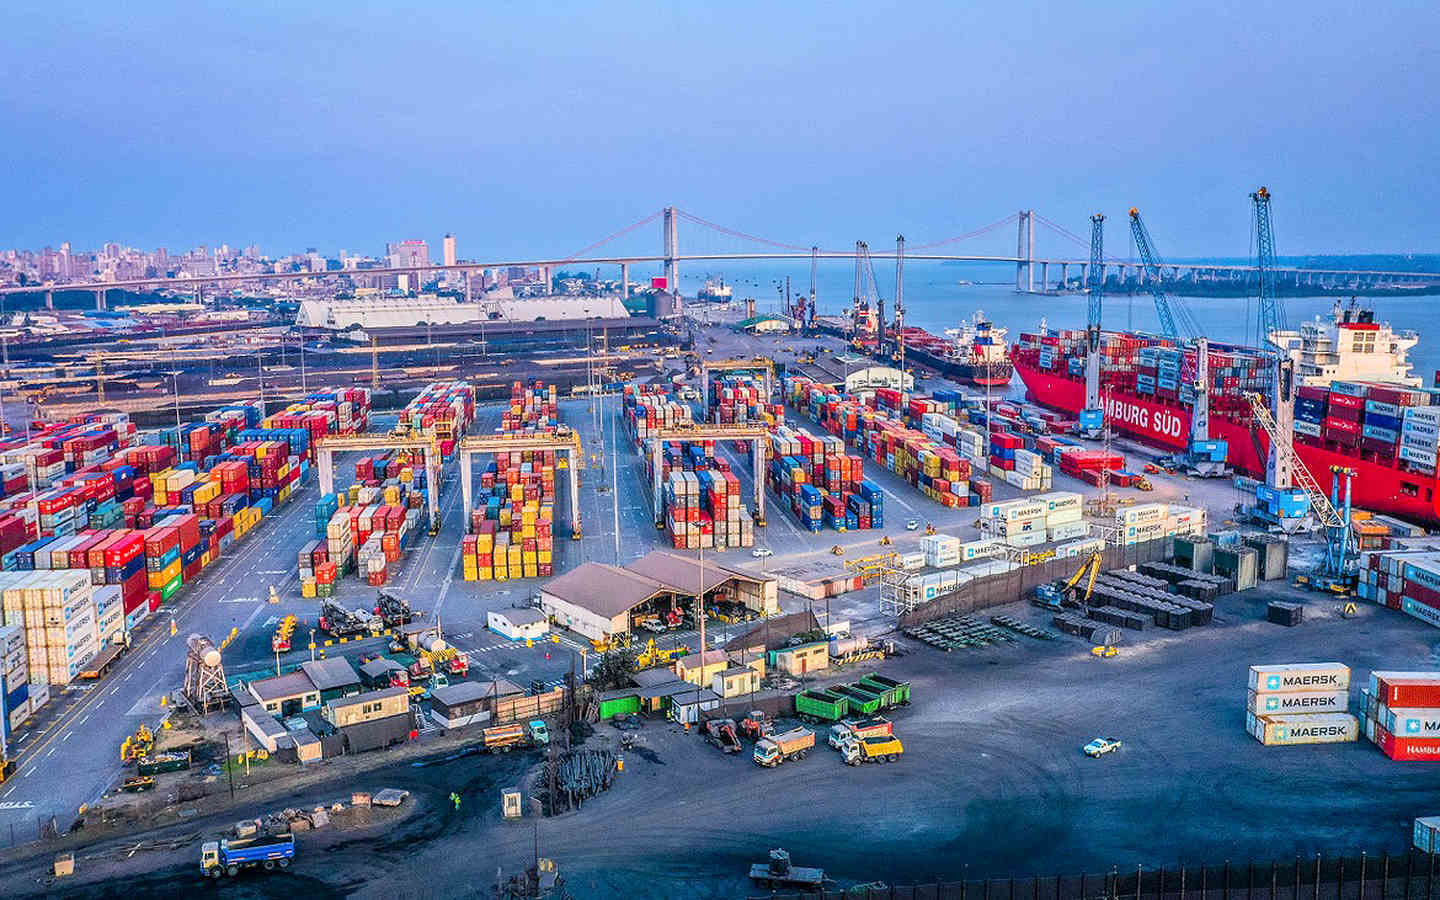 Mozambique signs a new expansion deal for its largest port